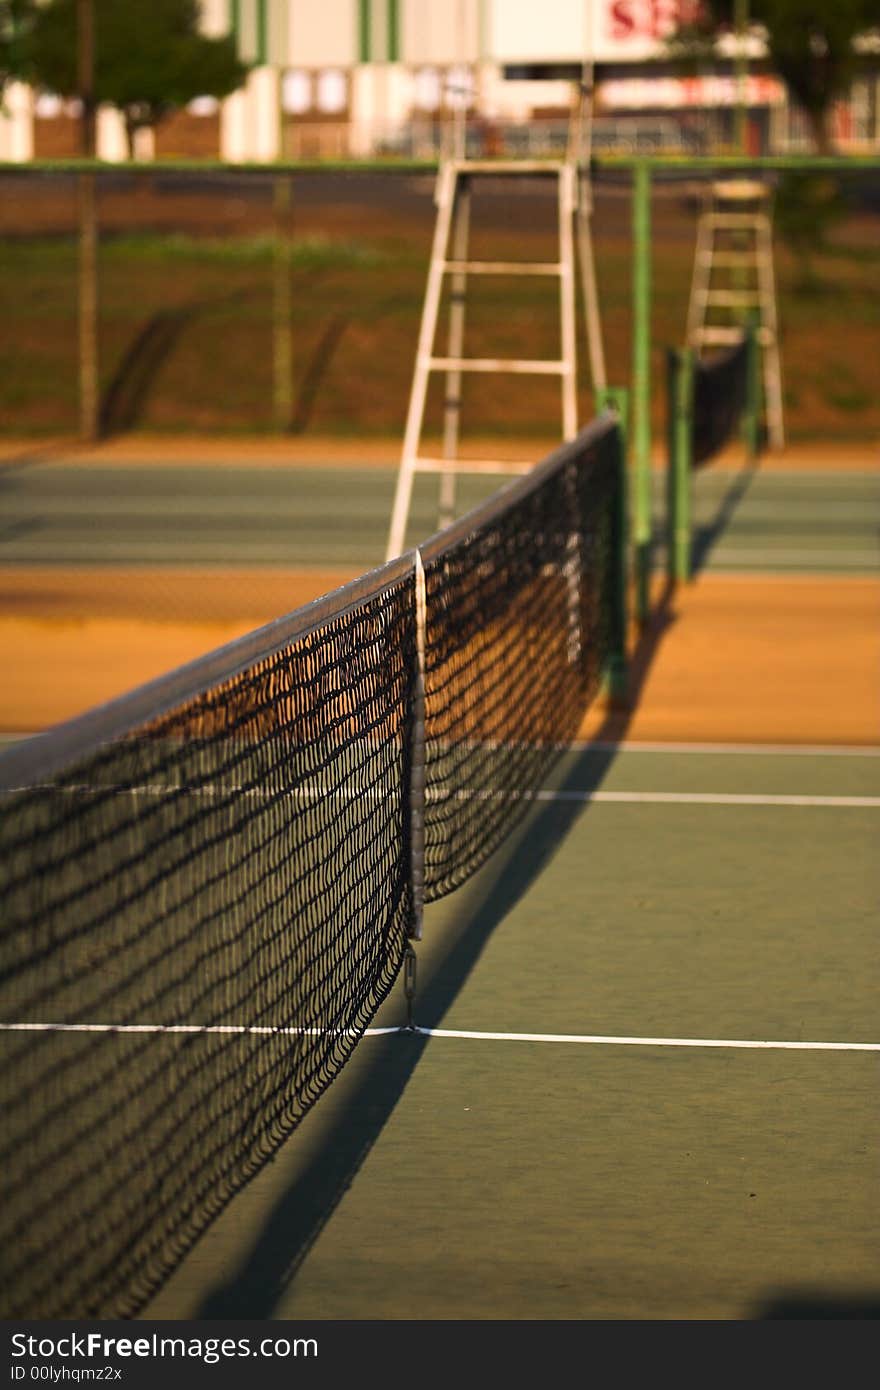 Tennis court net view with net in focus and the umpire's seat blurred